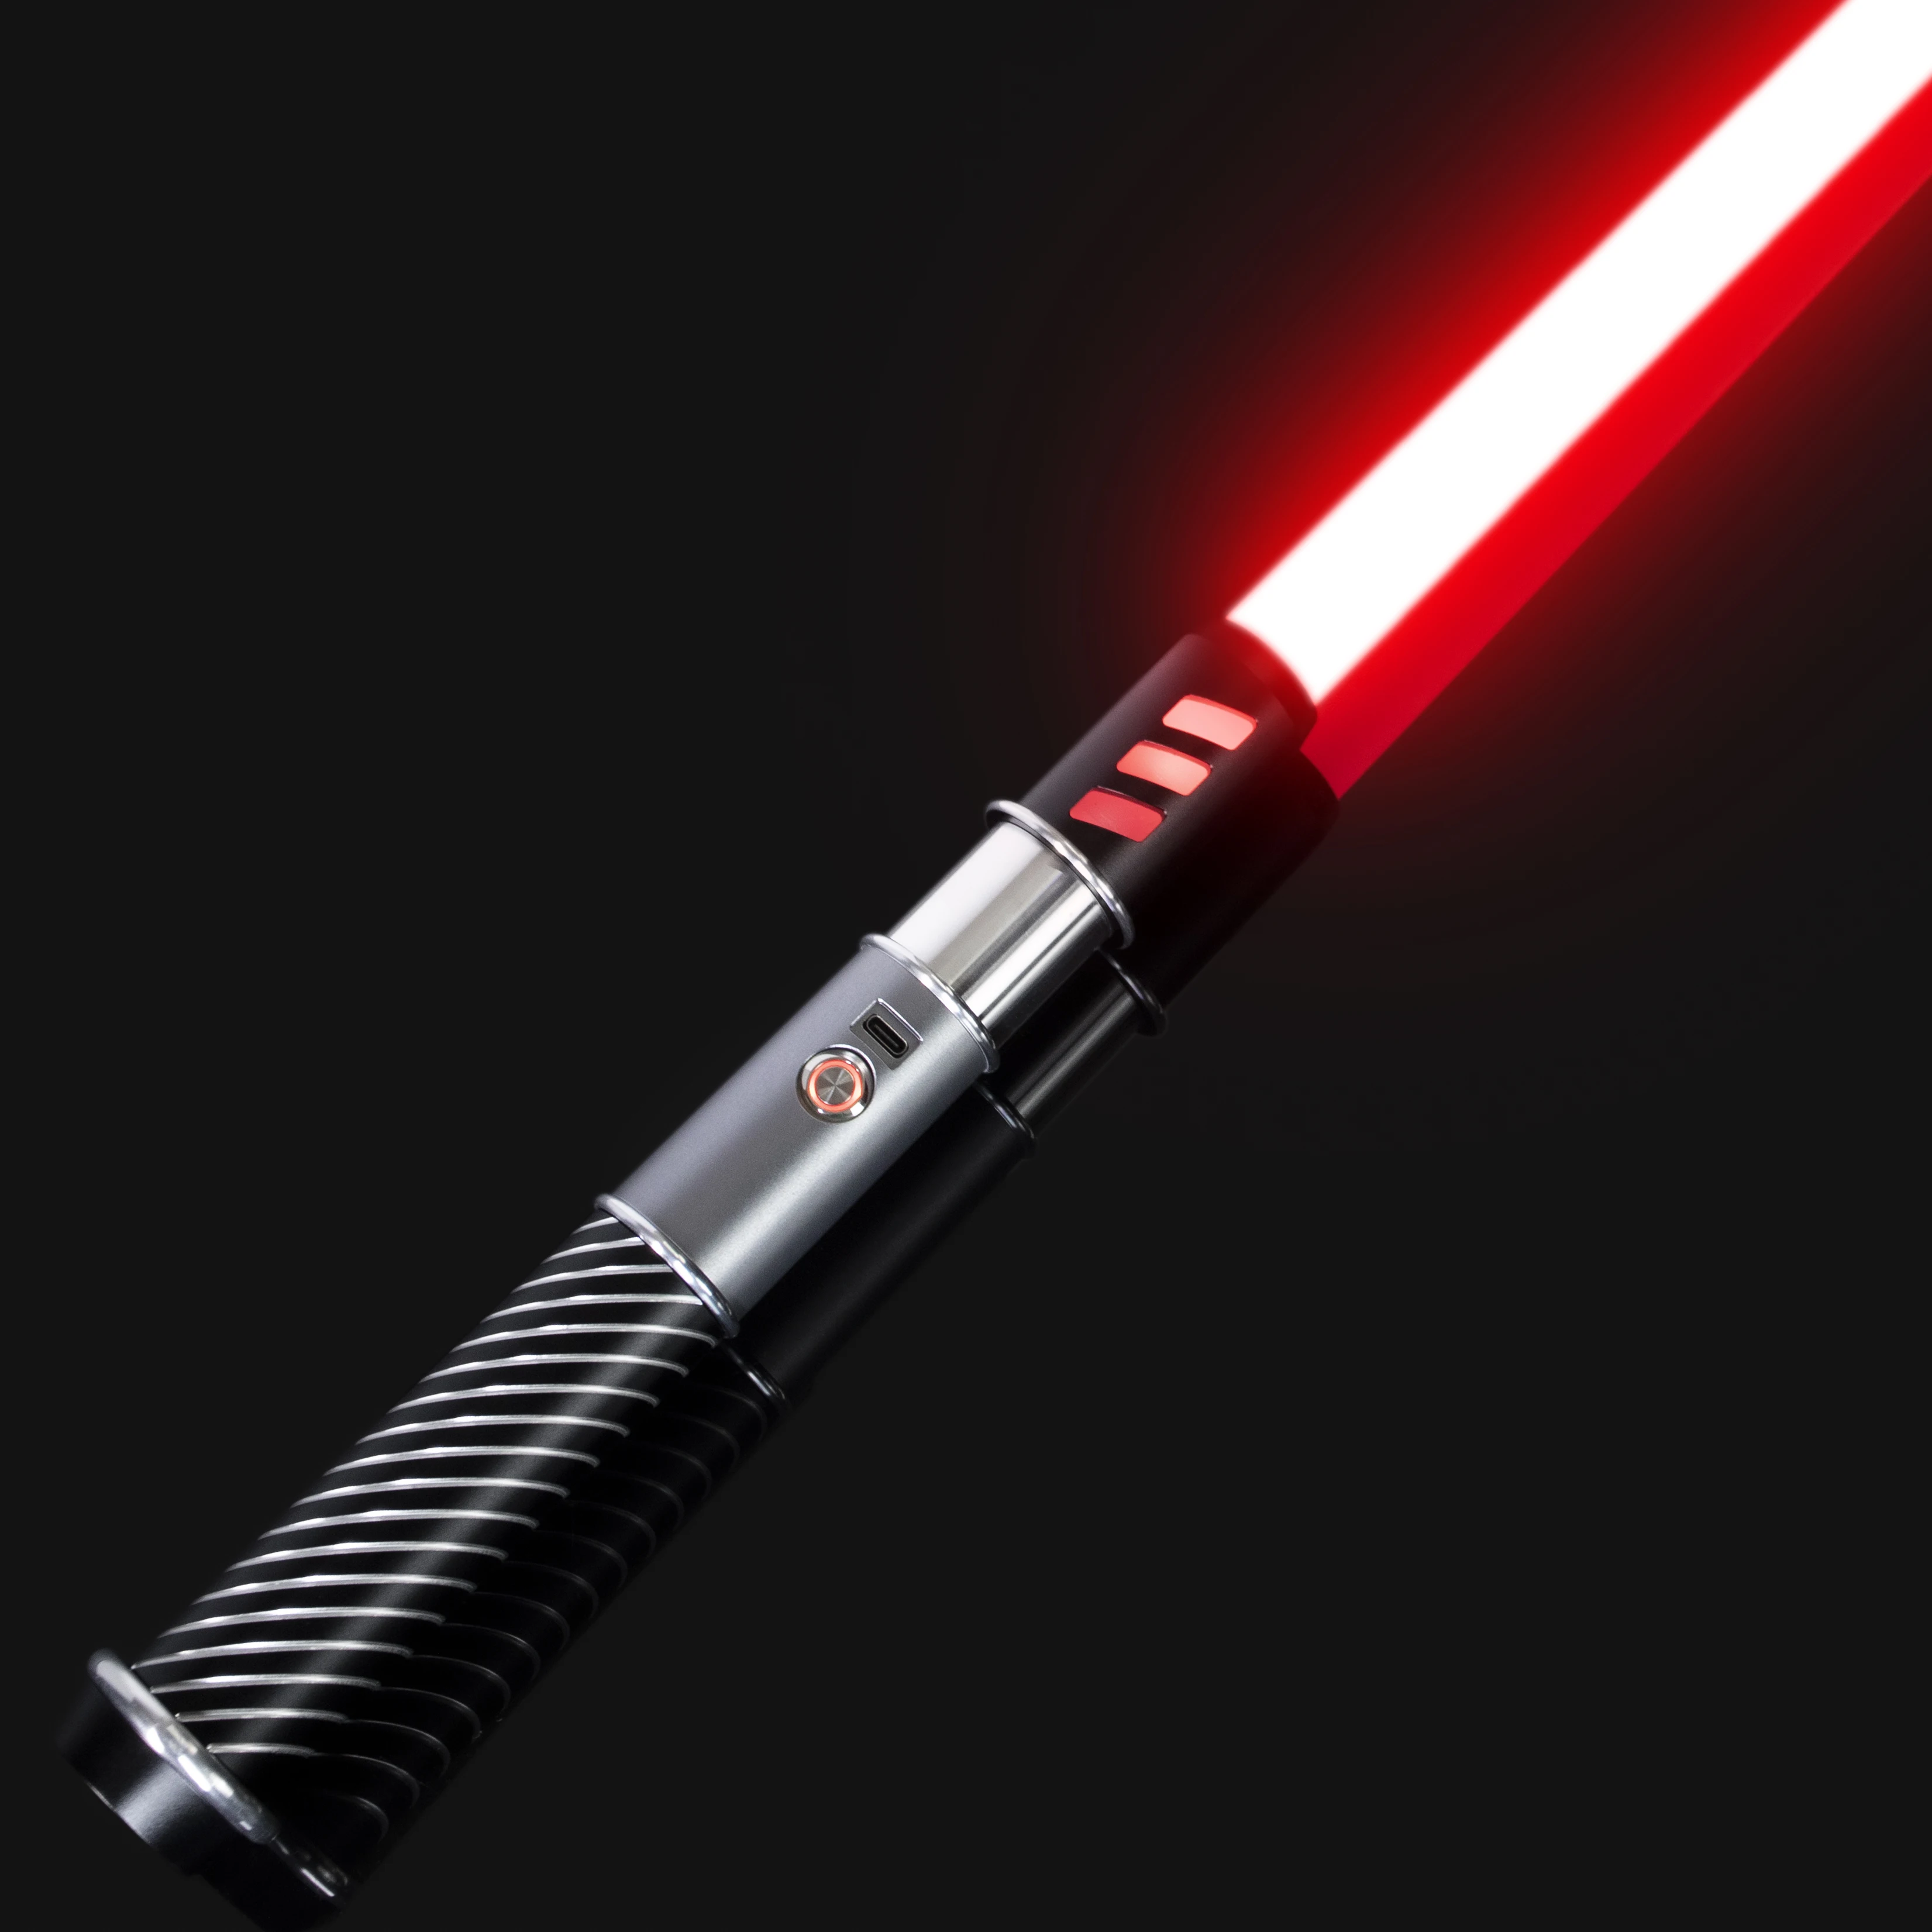 

DamienSaber Xeno3.0 Pixel Lightsaber Sensitive Smooth Swing Light Saber FOC Heavy Dueling Sabers Metal Hilt with Bluetooth